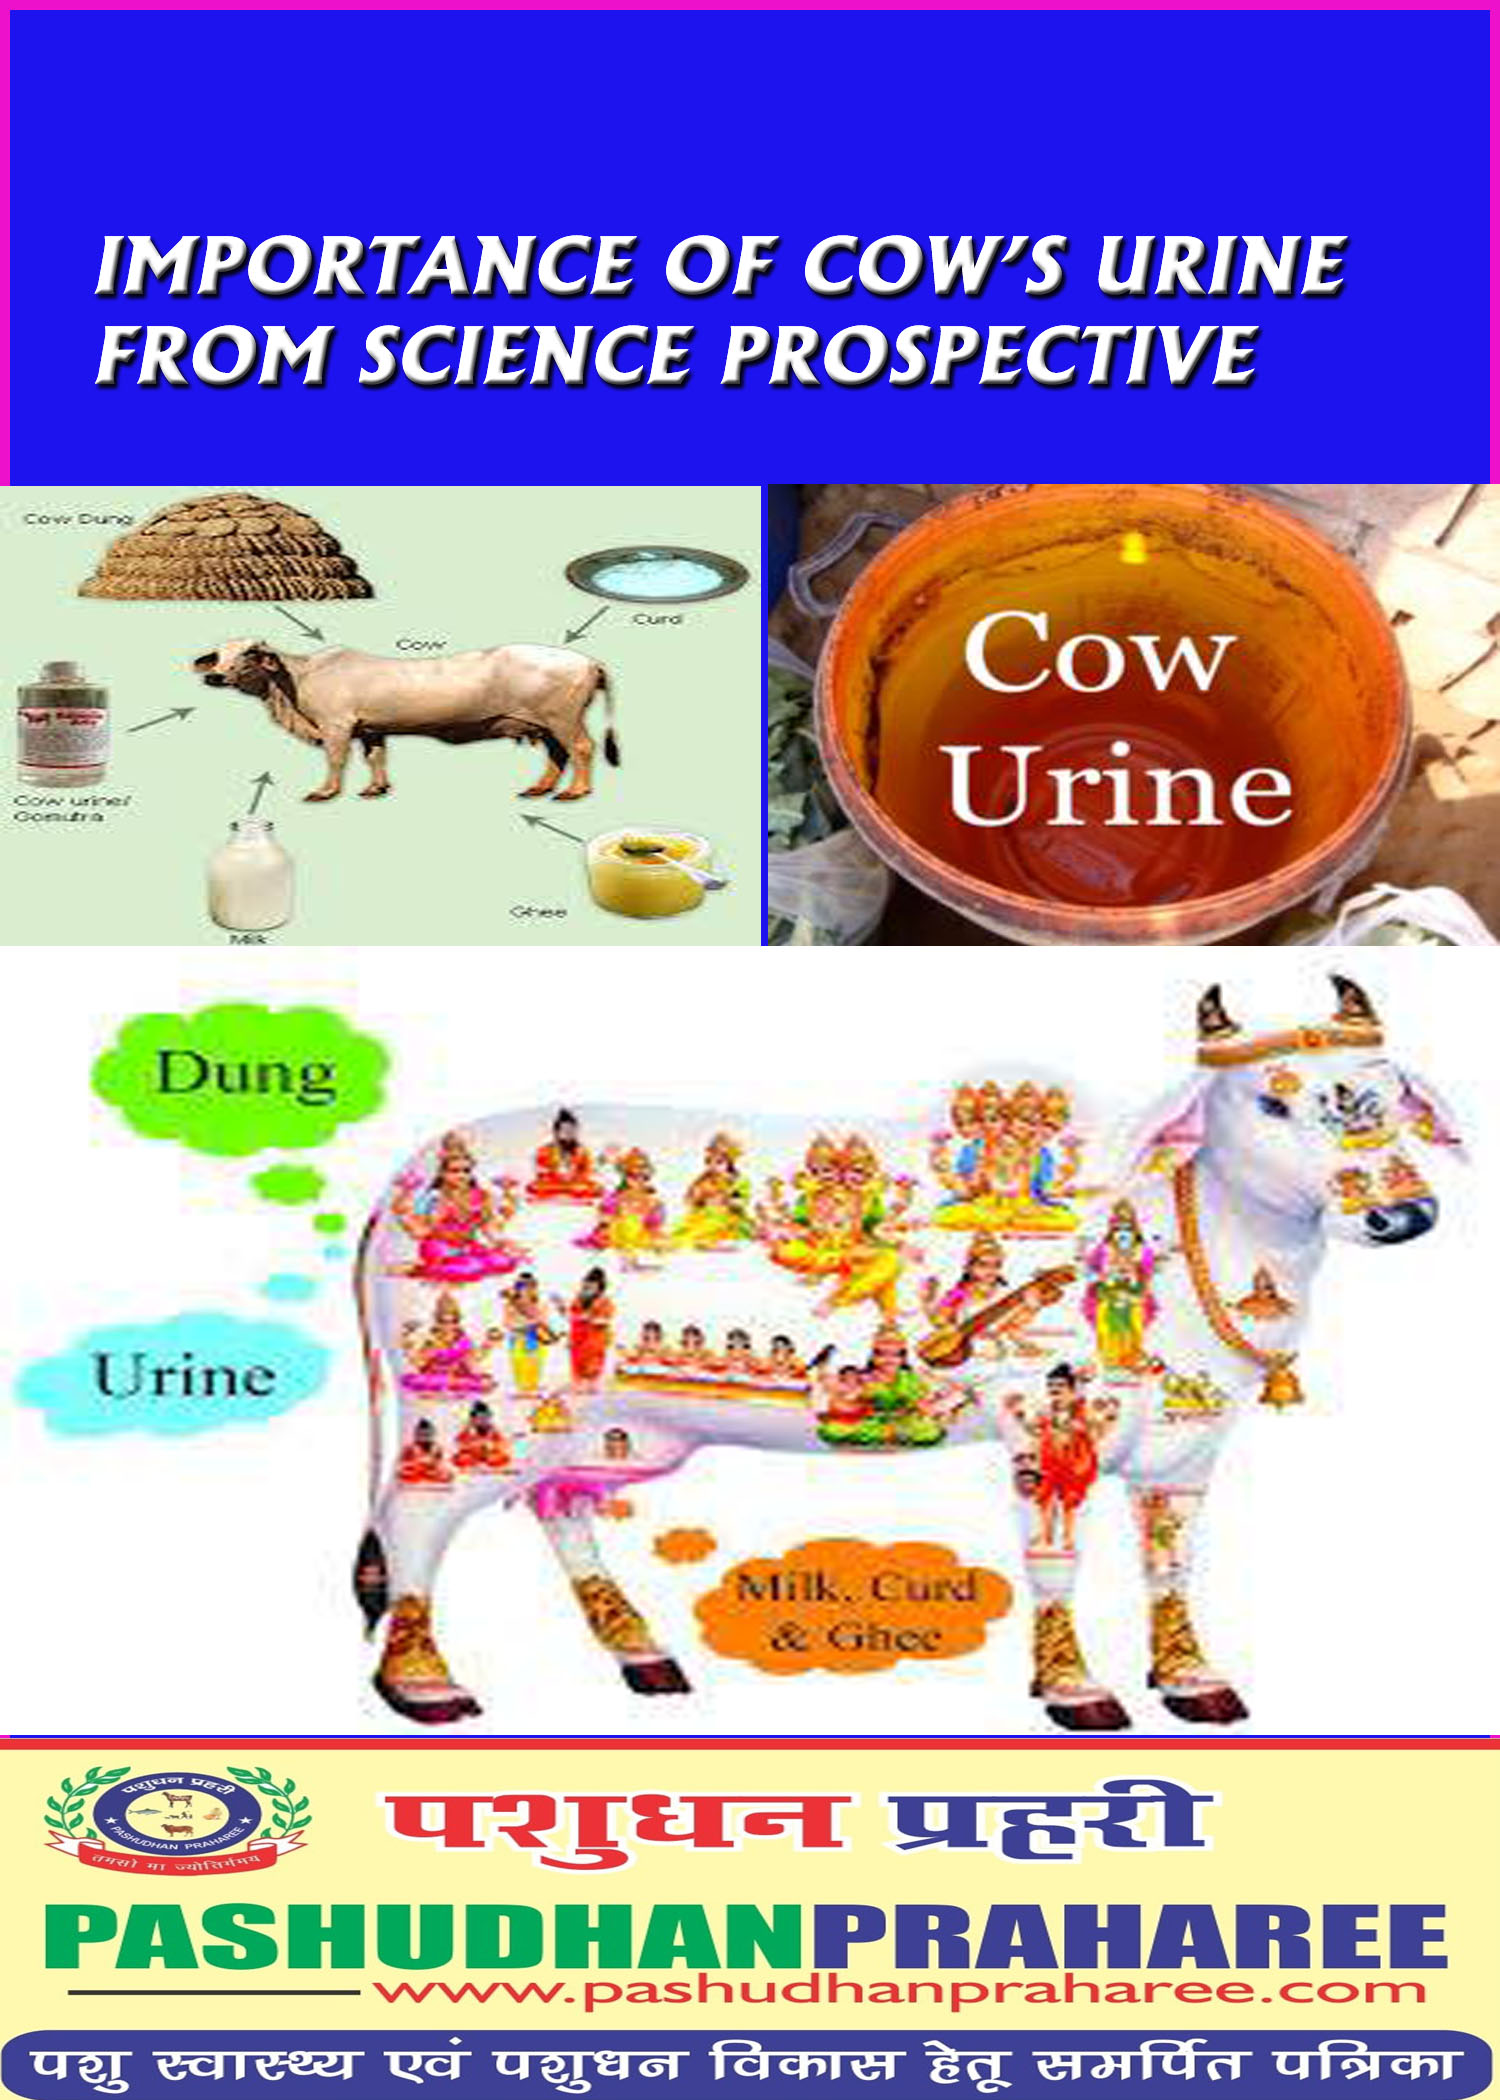 IMPORTANCE OF COW'S URINE FROM SCIENCE PROSPECTIVE – Pashudhan praharee